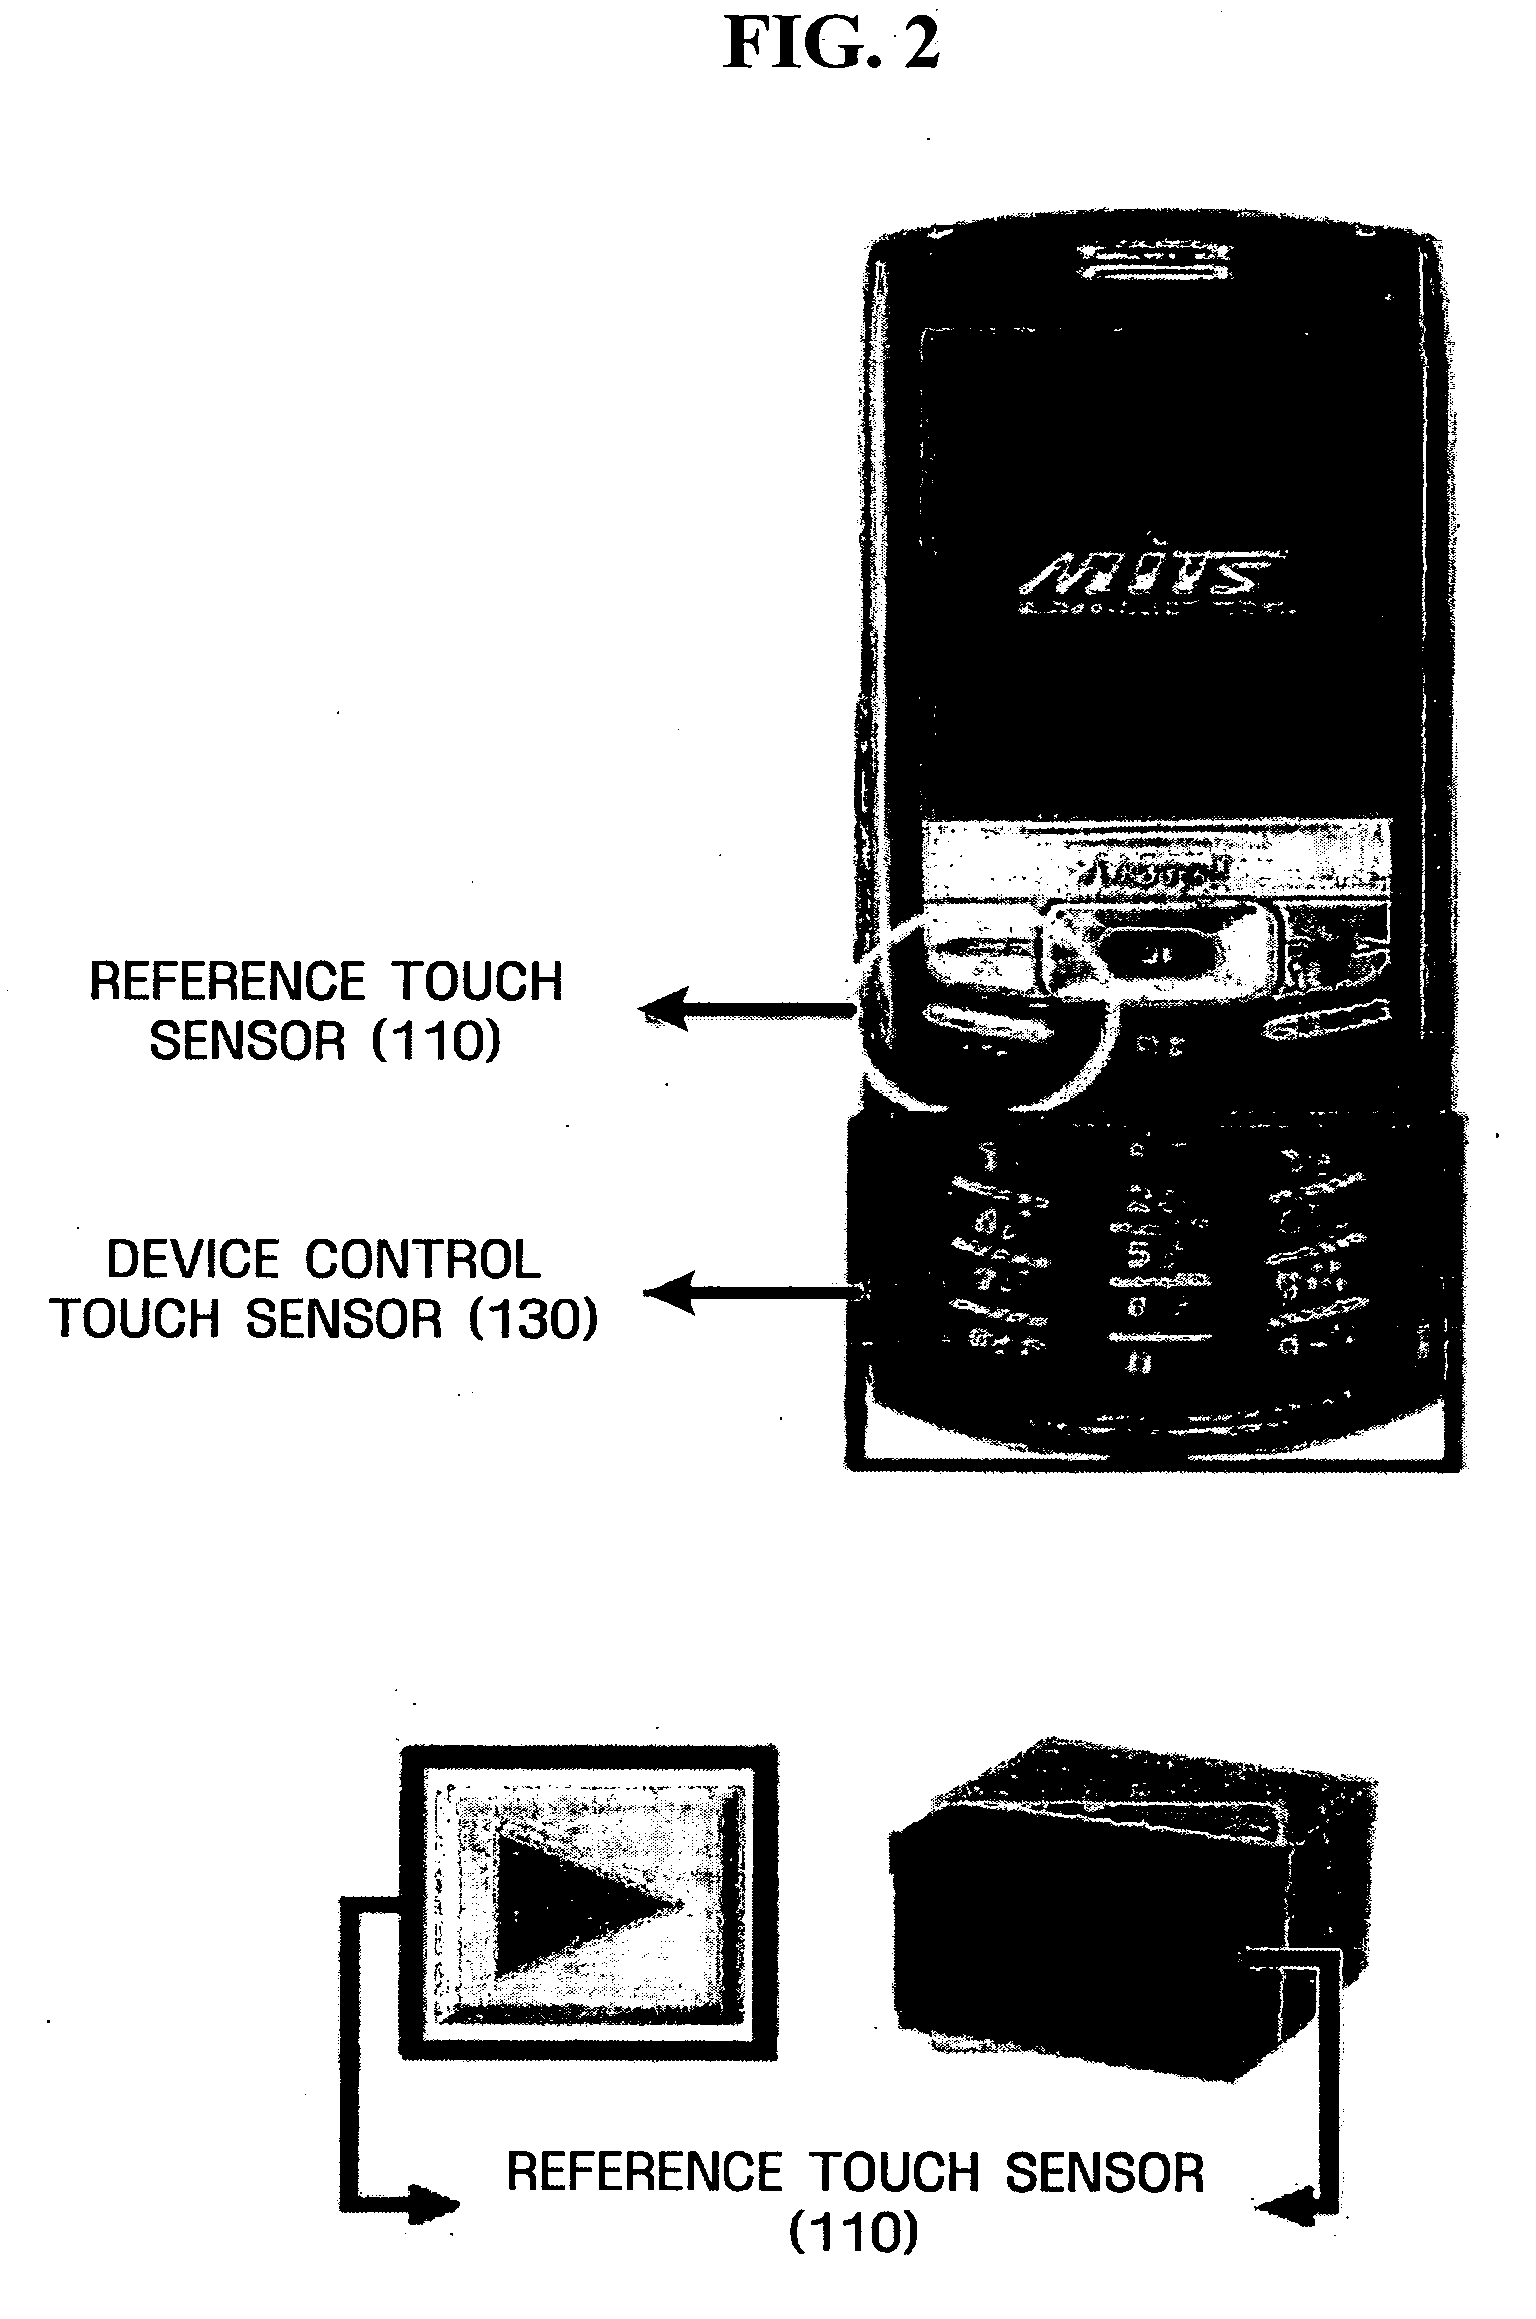 Apparatus, method, and medium for adaptively setting reference sensing boundary of touch sensor